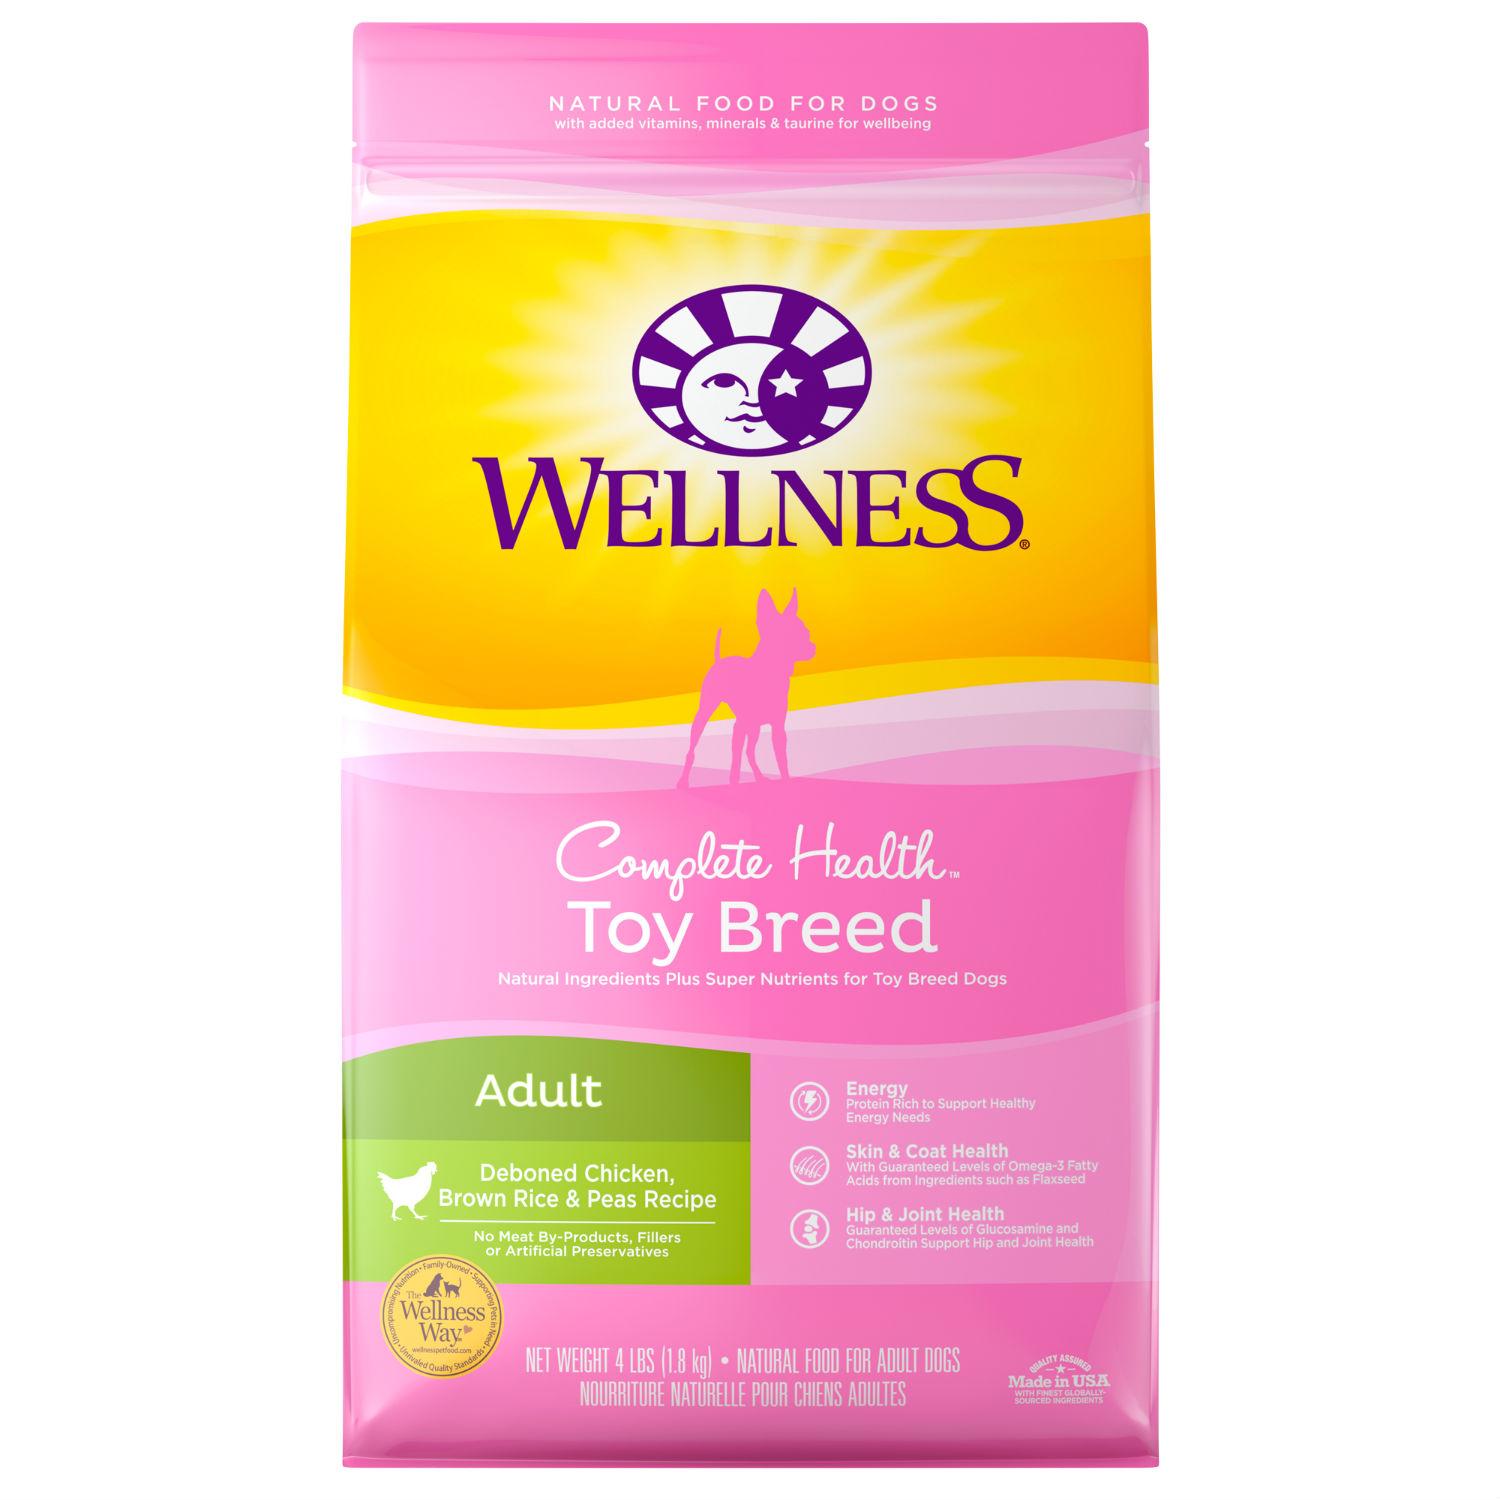 Wellness Complete Health Toy Breed Dog Food